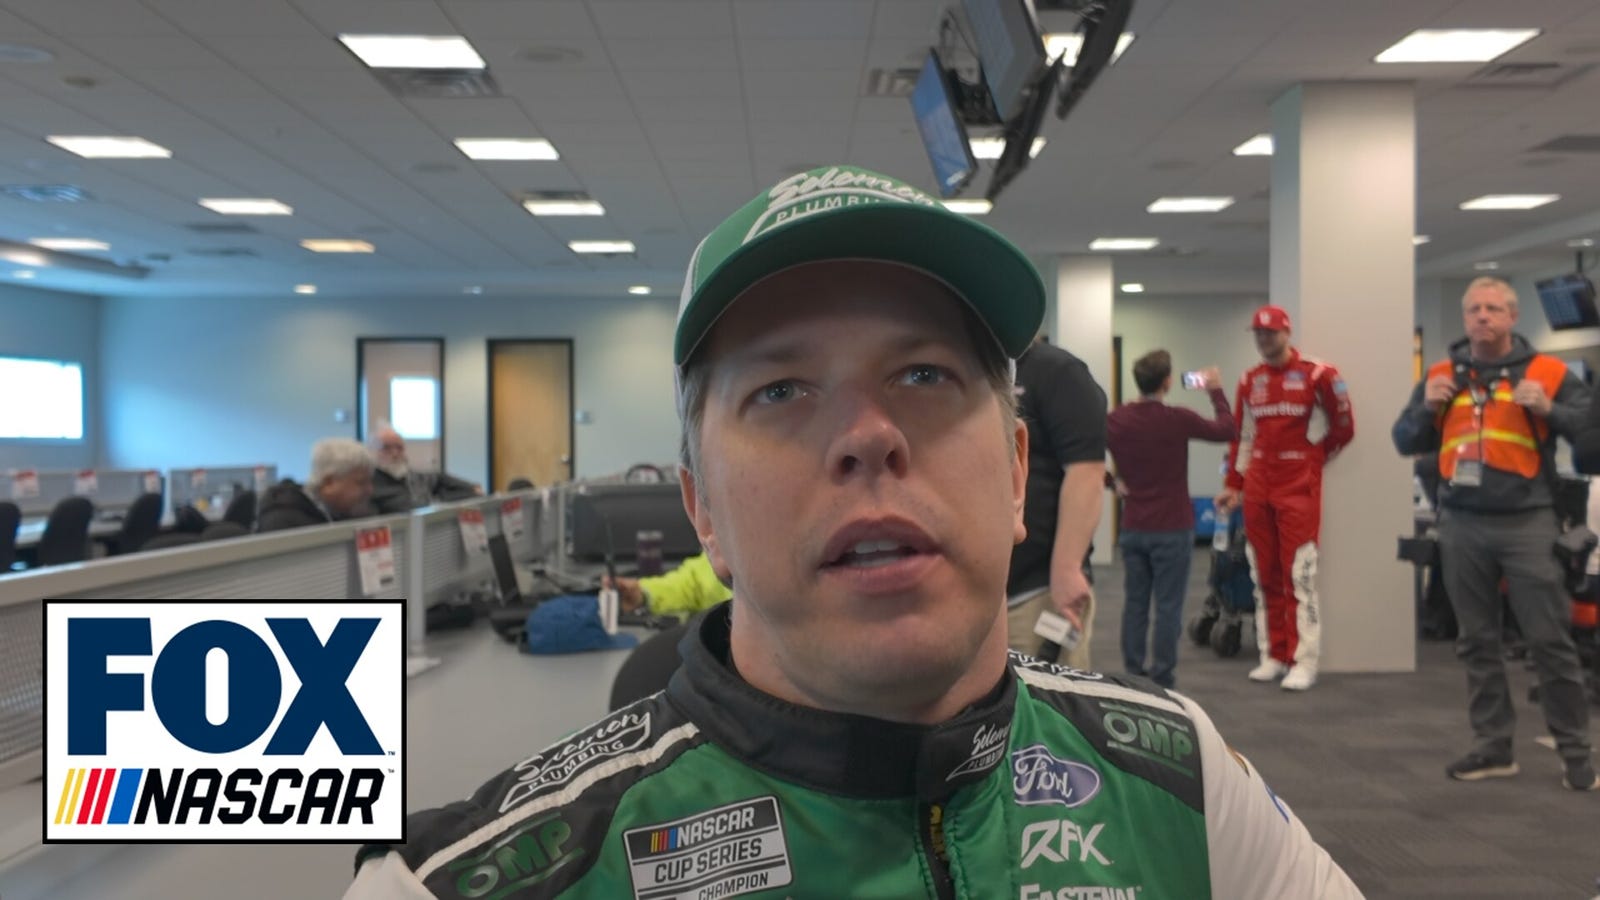 'I wanna win races' – Brad Keselowski on being behind in the Cup Series standings 